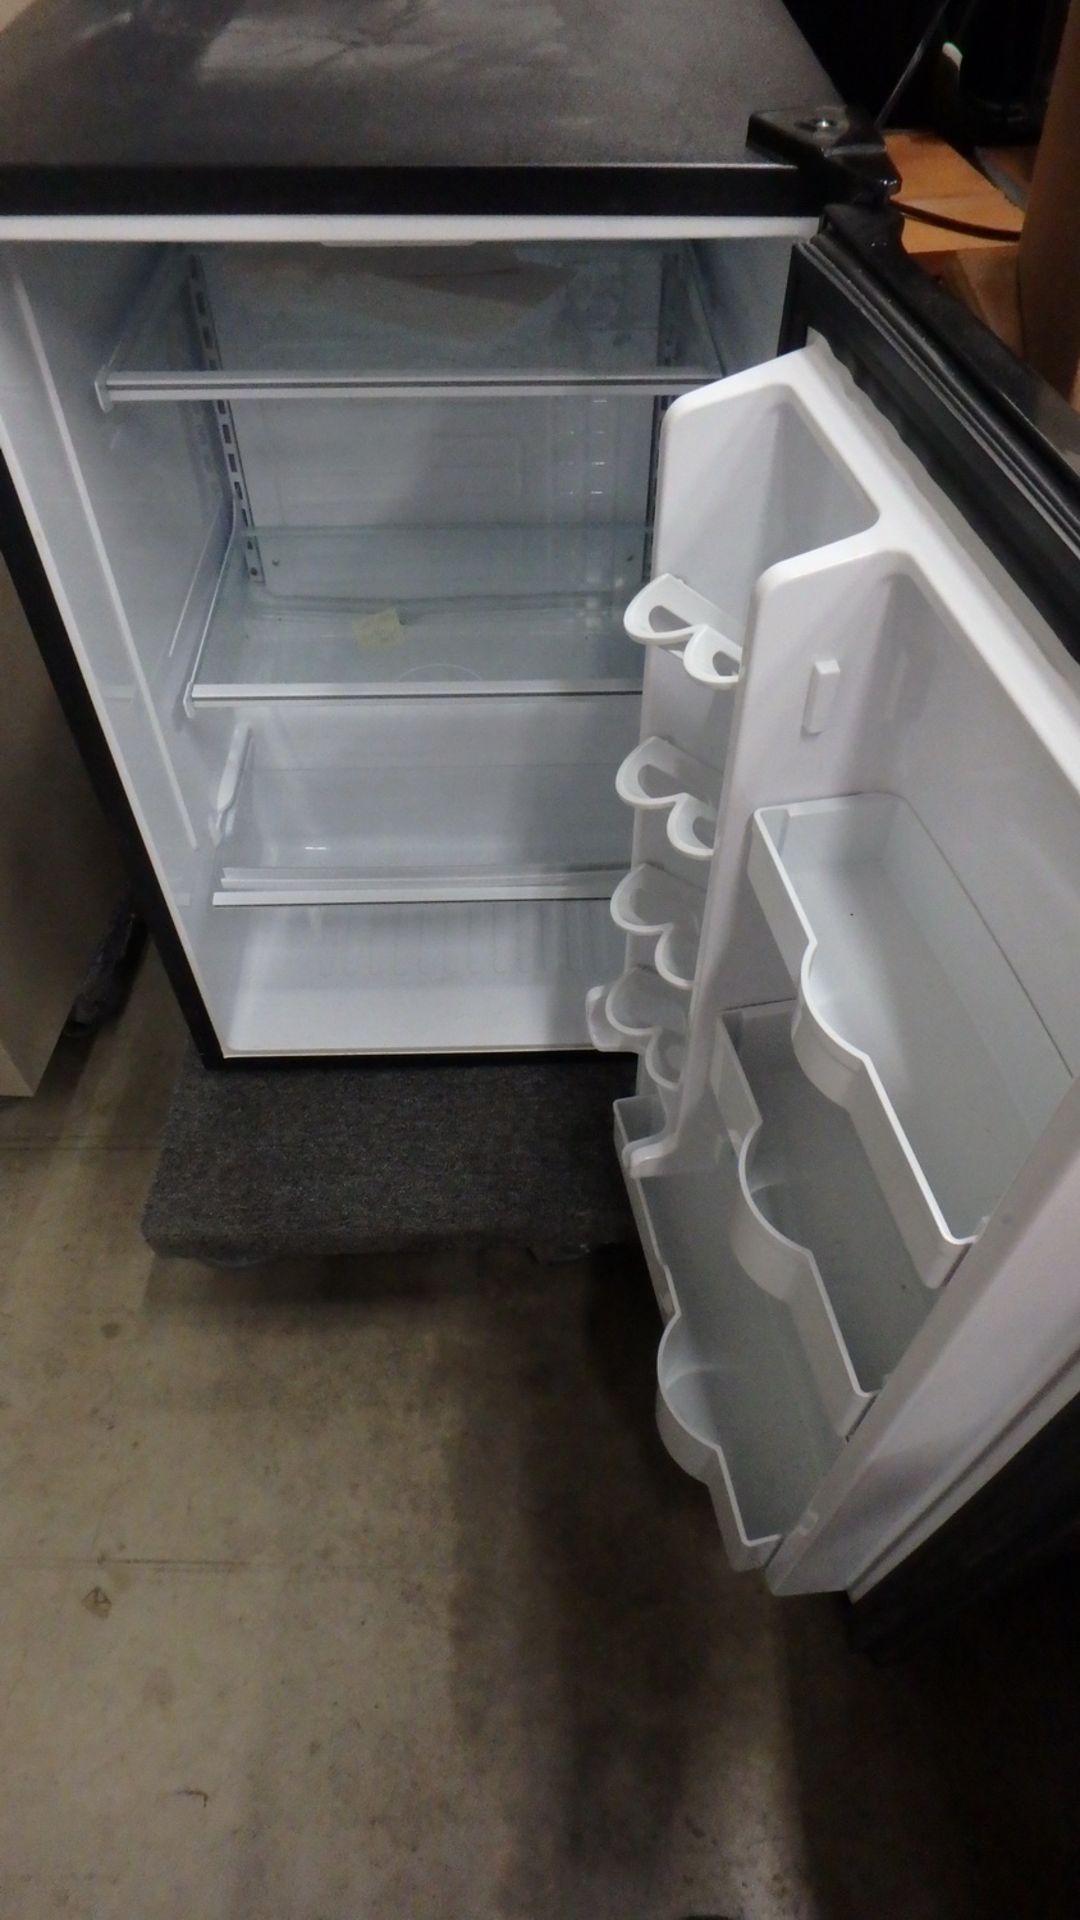 KENMORE STAINLESS STEEL BAR FRIDGE (PICKUP FROM WAREHOUSE 646 MAGNETIC DRIVE TORONTO) - Image 2 of 3